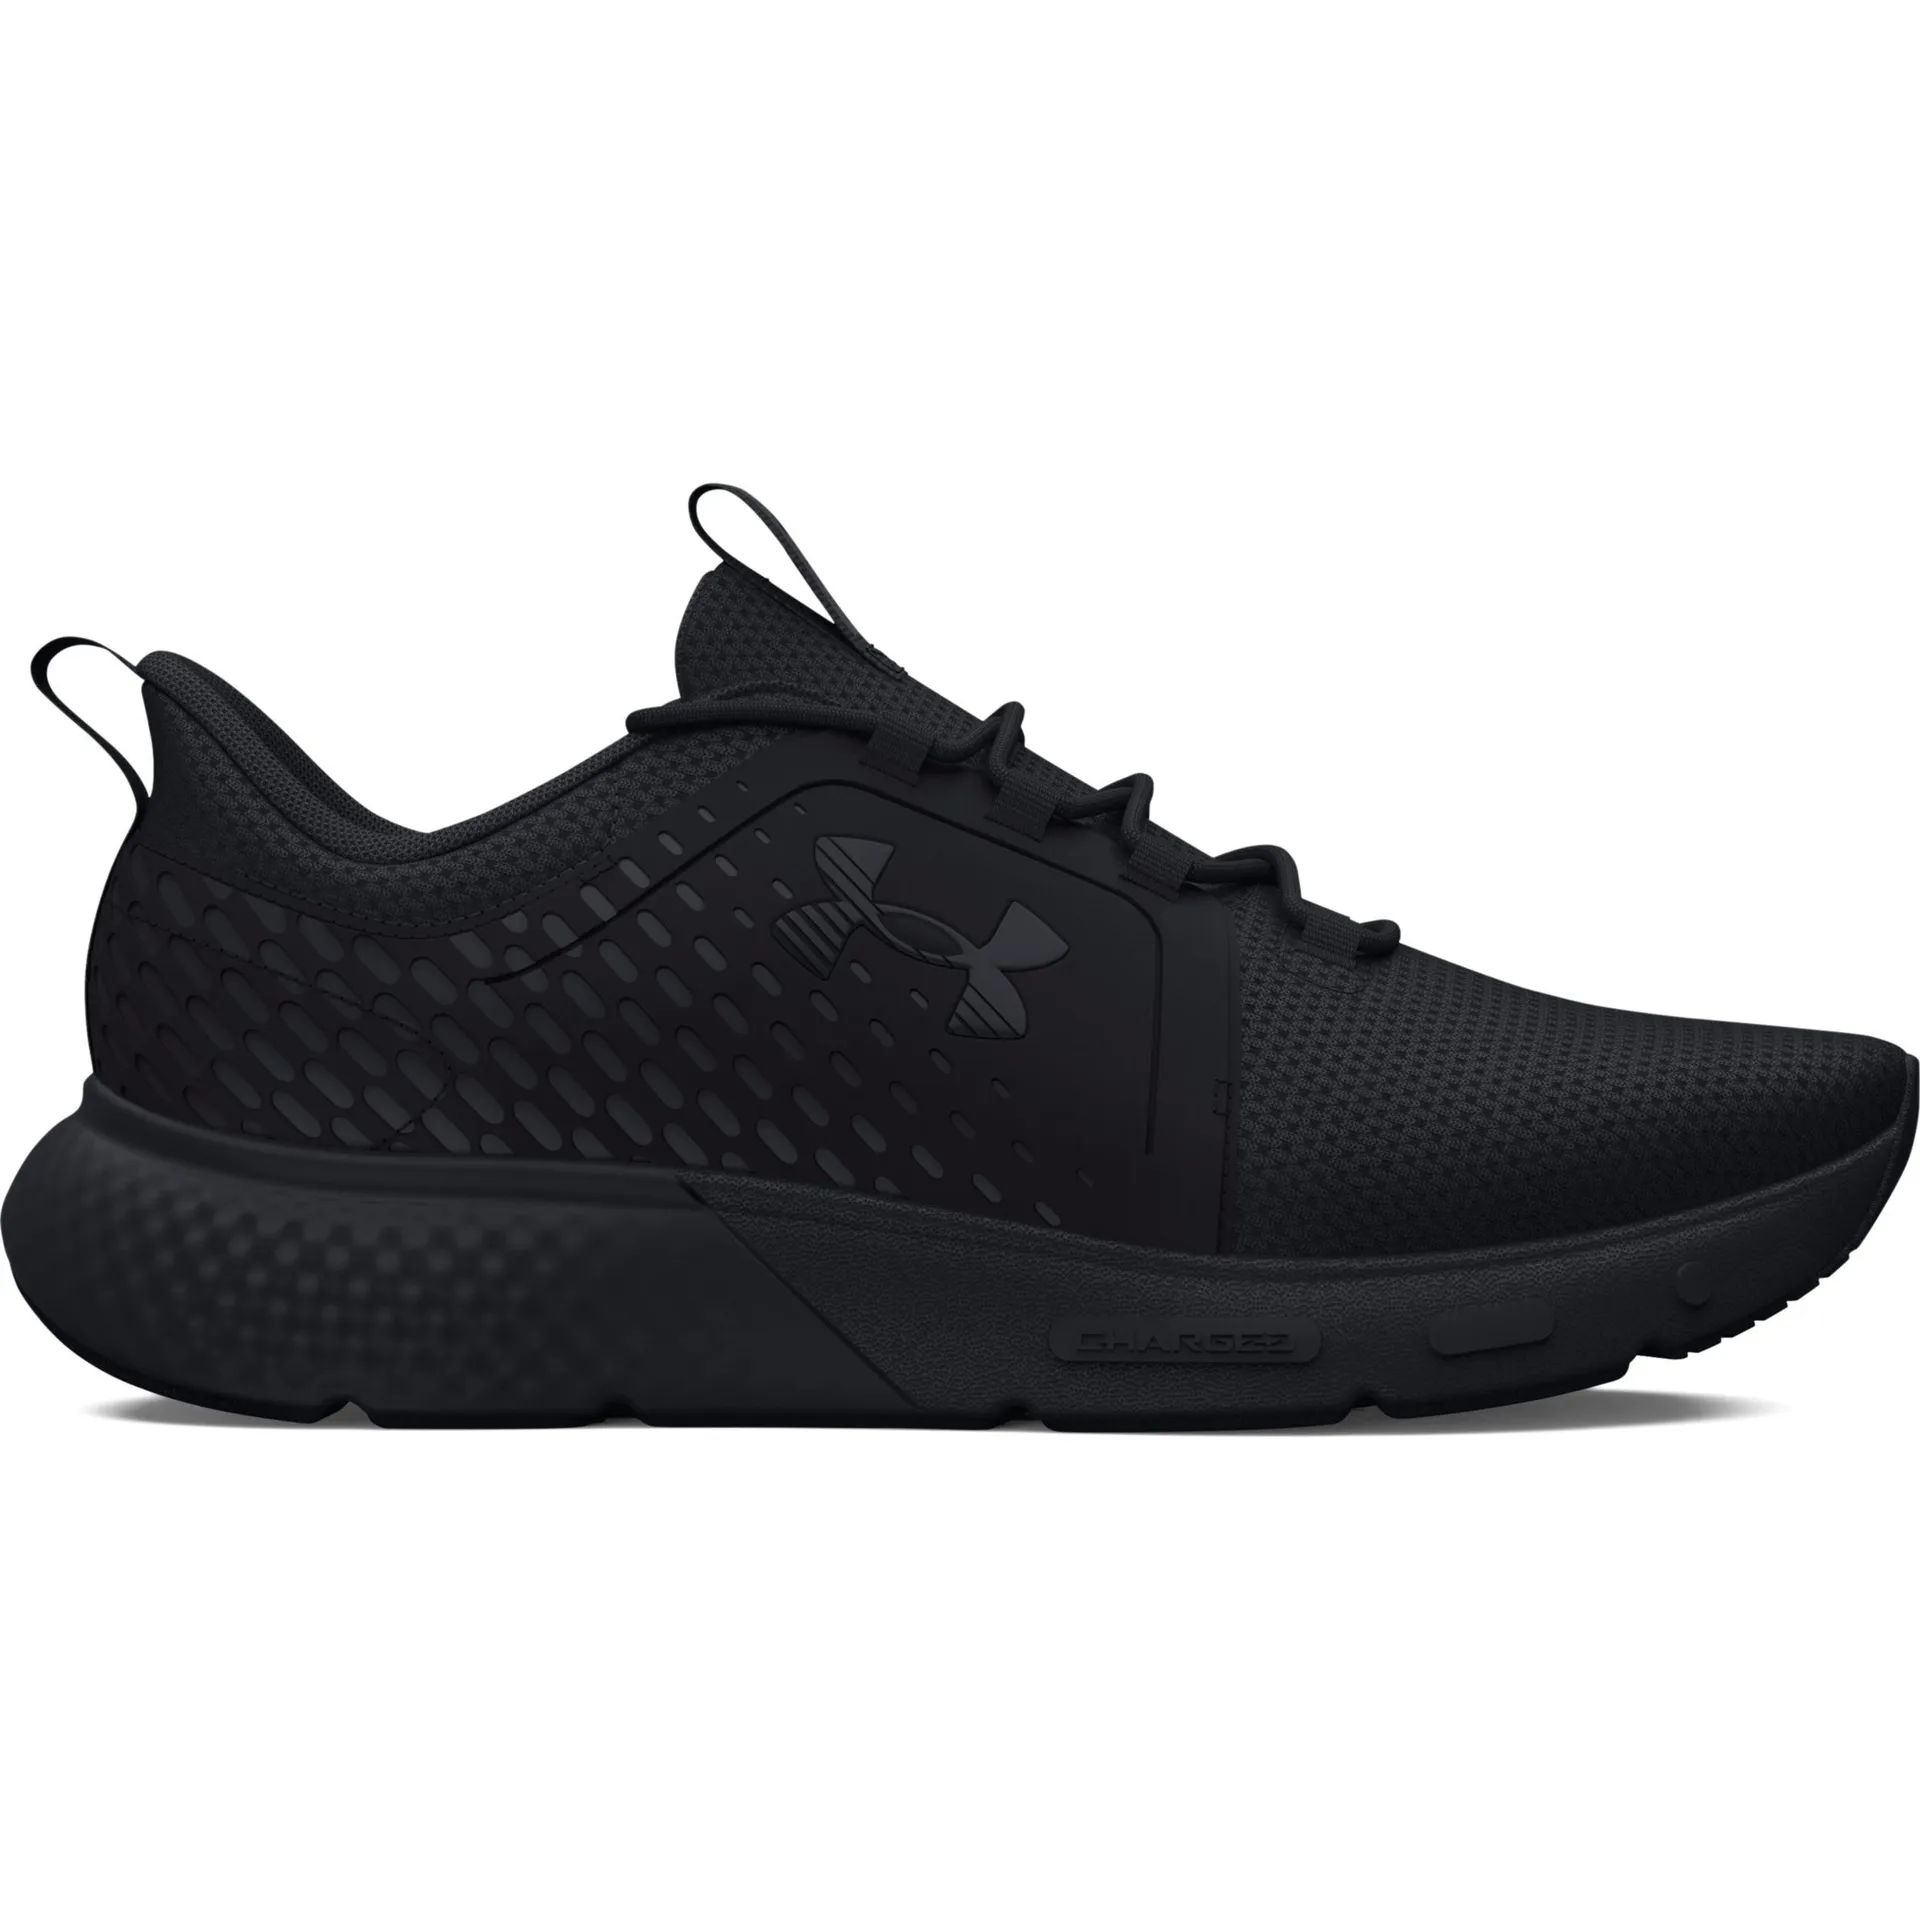 Under Armour Women's Charged Decoy Running Shoes